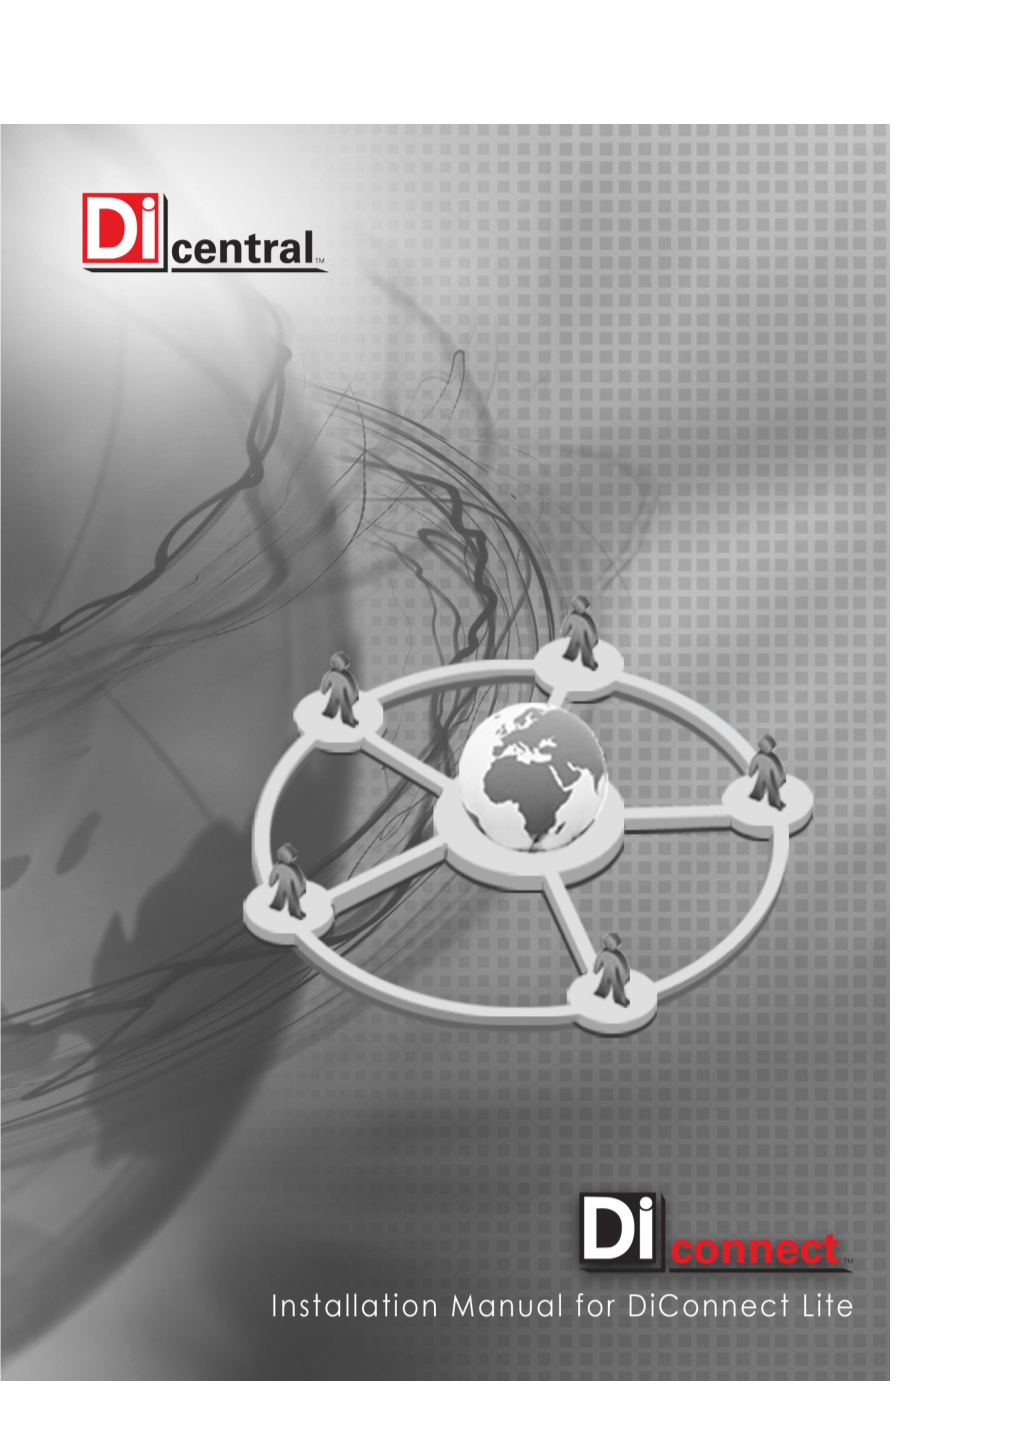 Installationmanual for Diconnect Lite